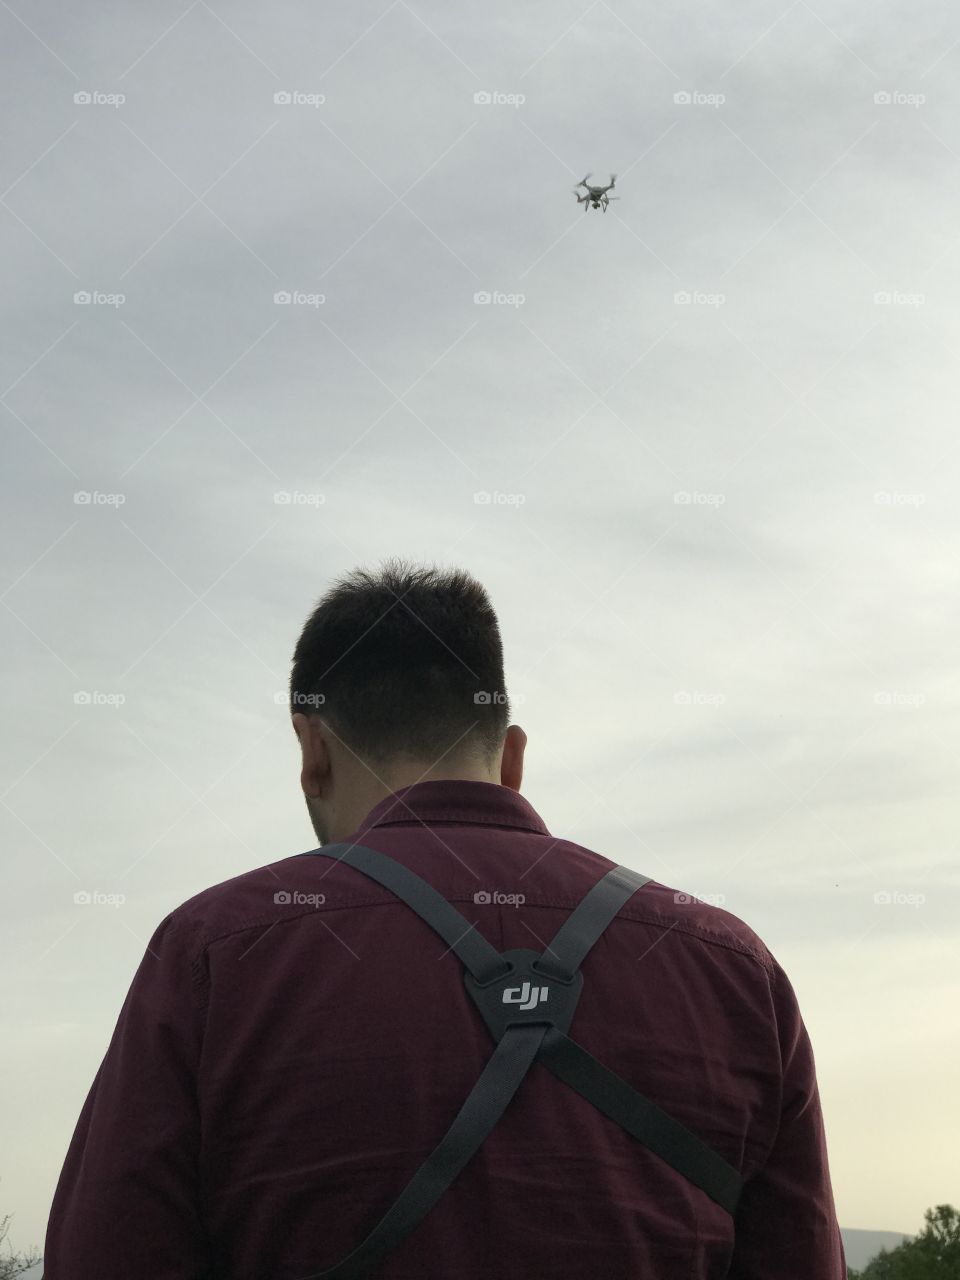 Drone fly